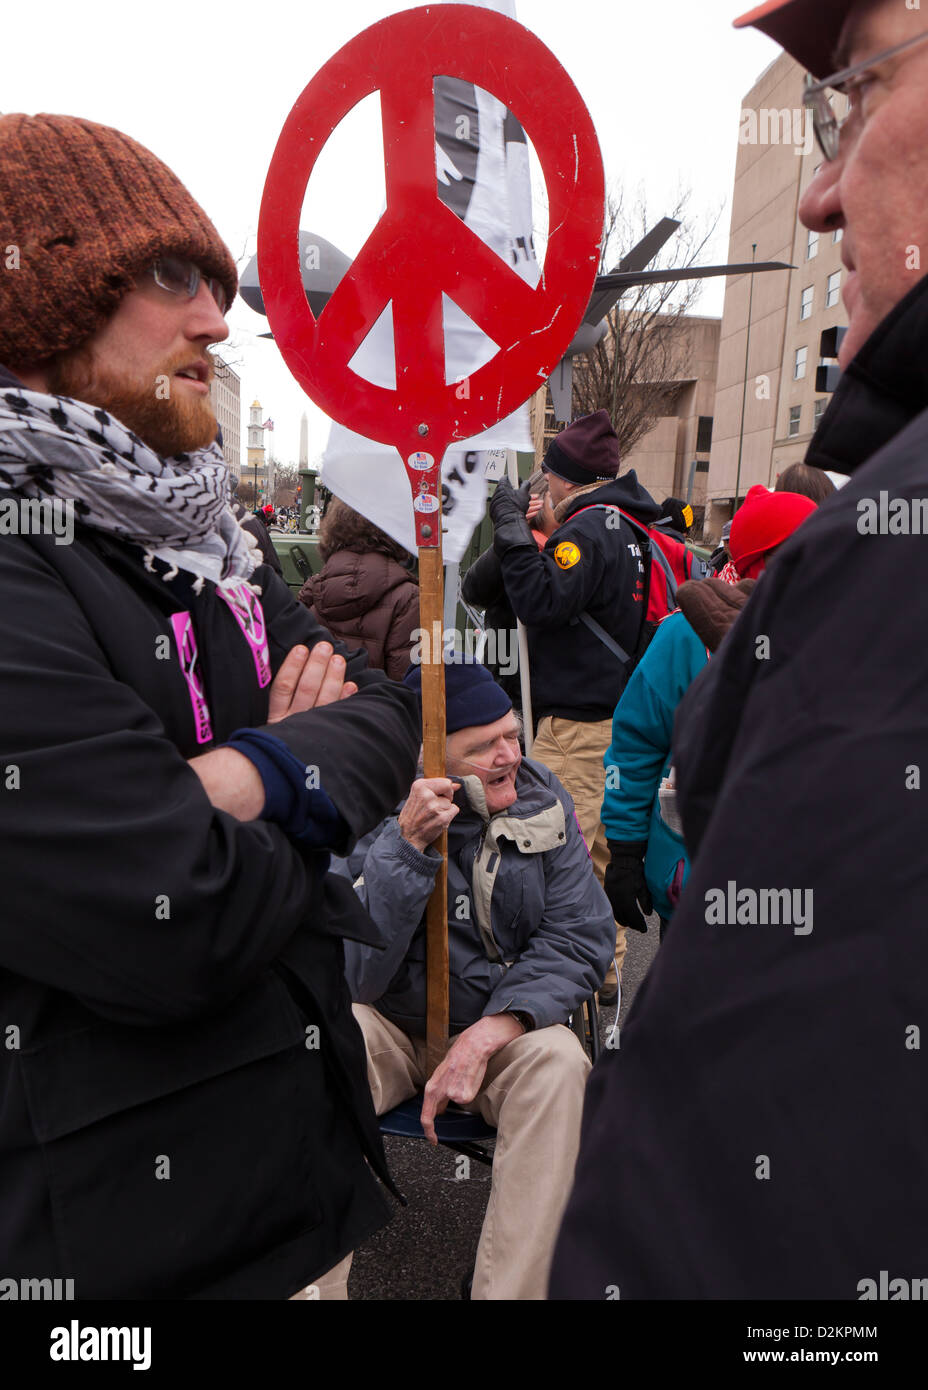 Red peace sign held up in demonstration Stock Photo